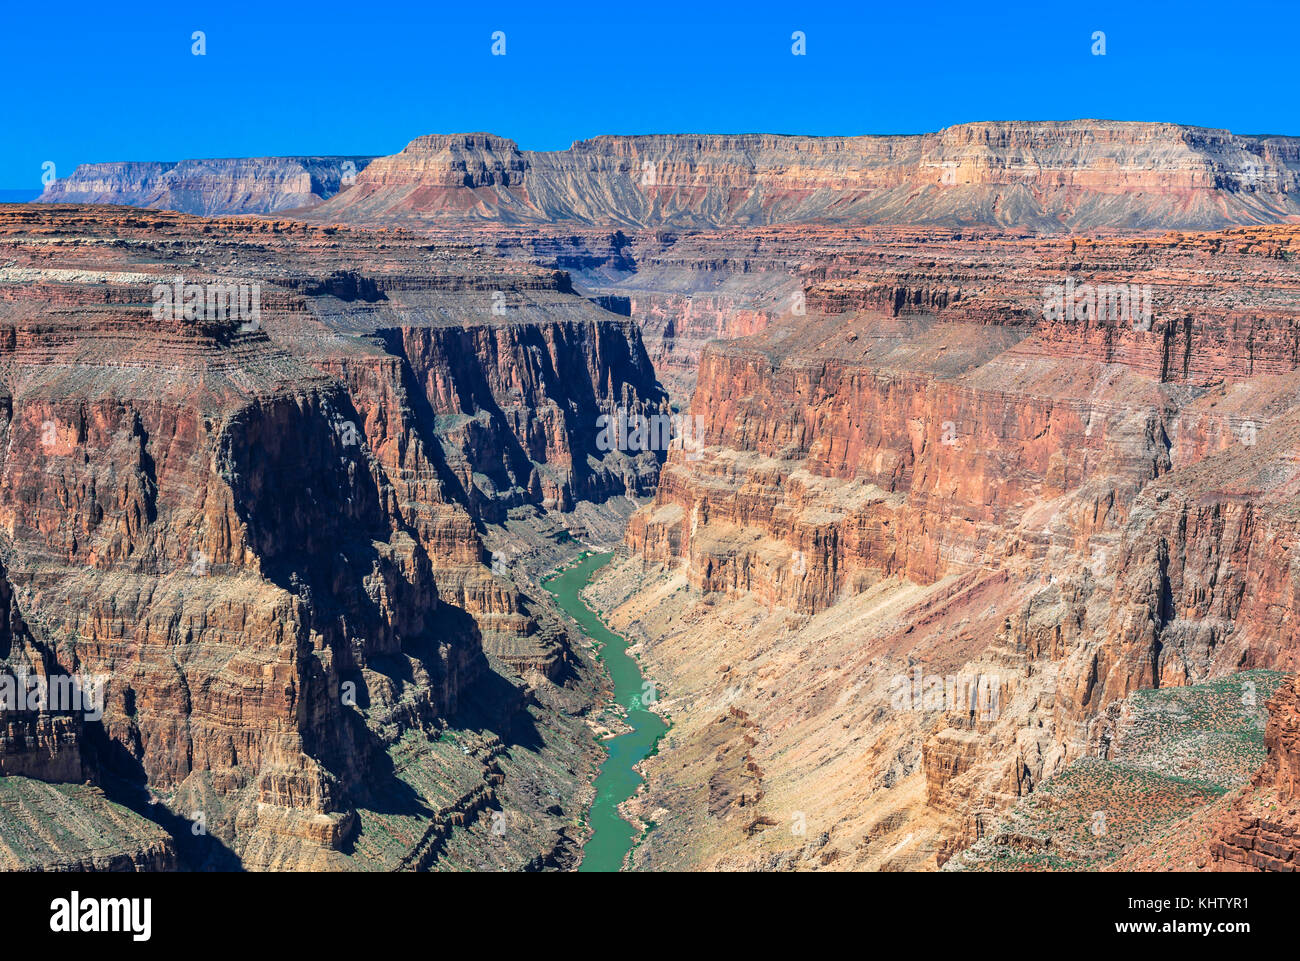 colorado river in the fishtail rapids area of grand canyon national park, arizona Stock Photo